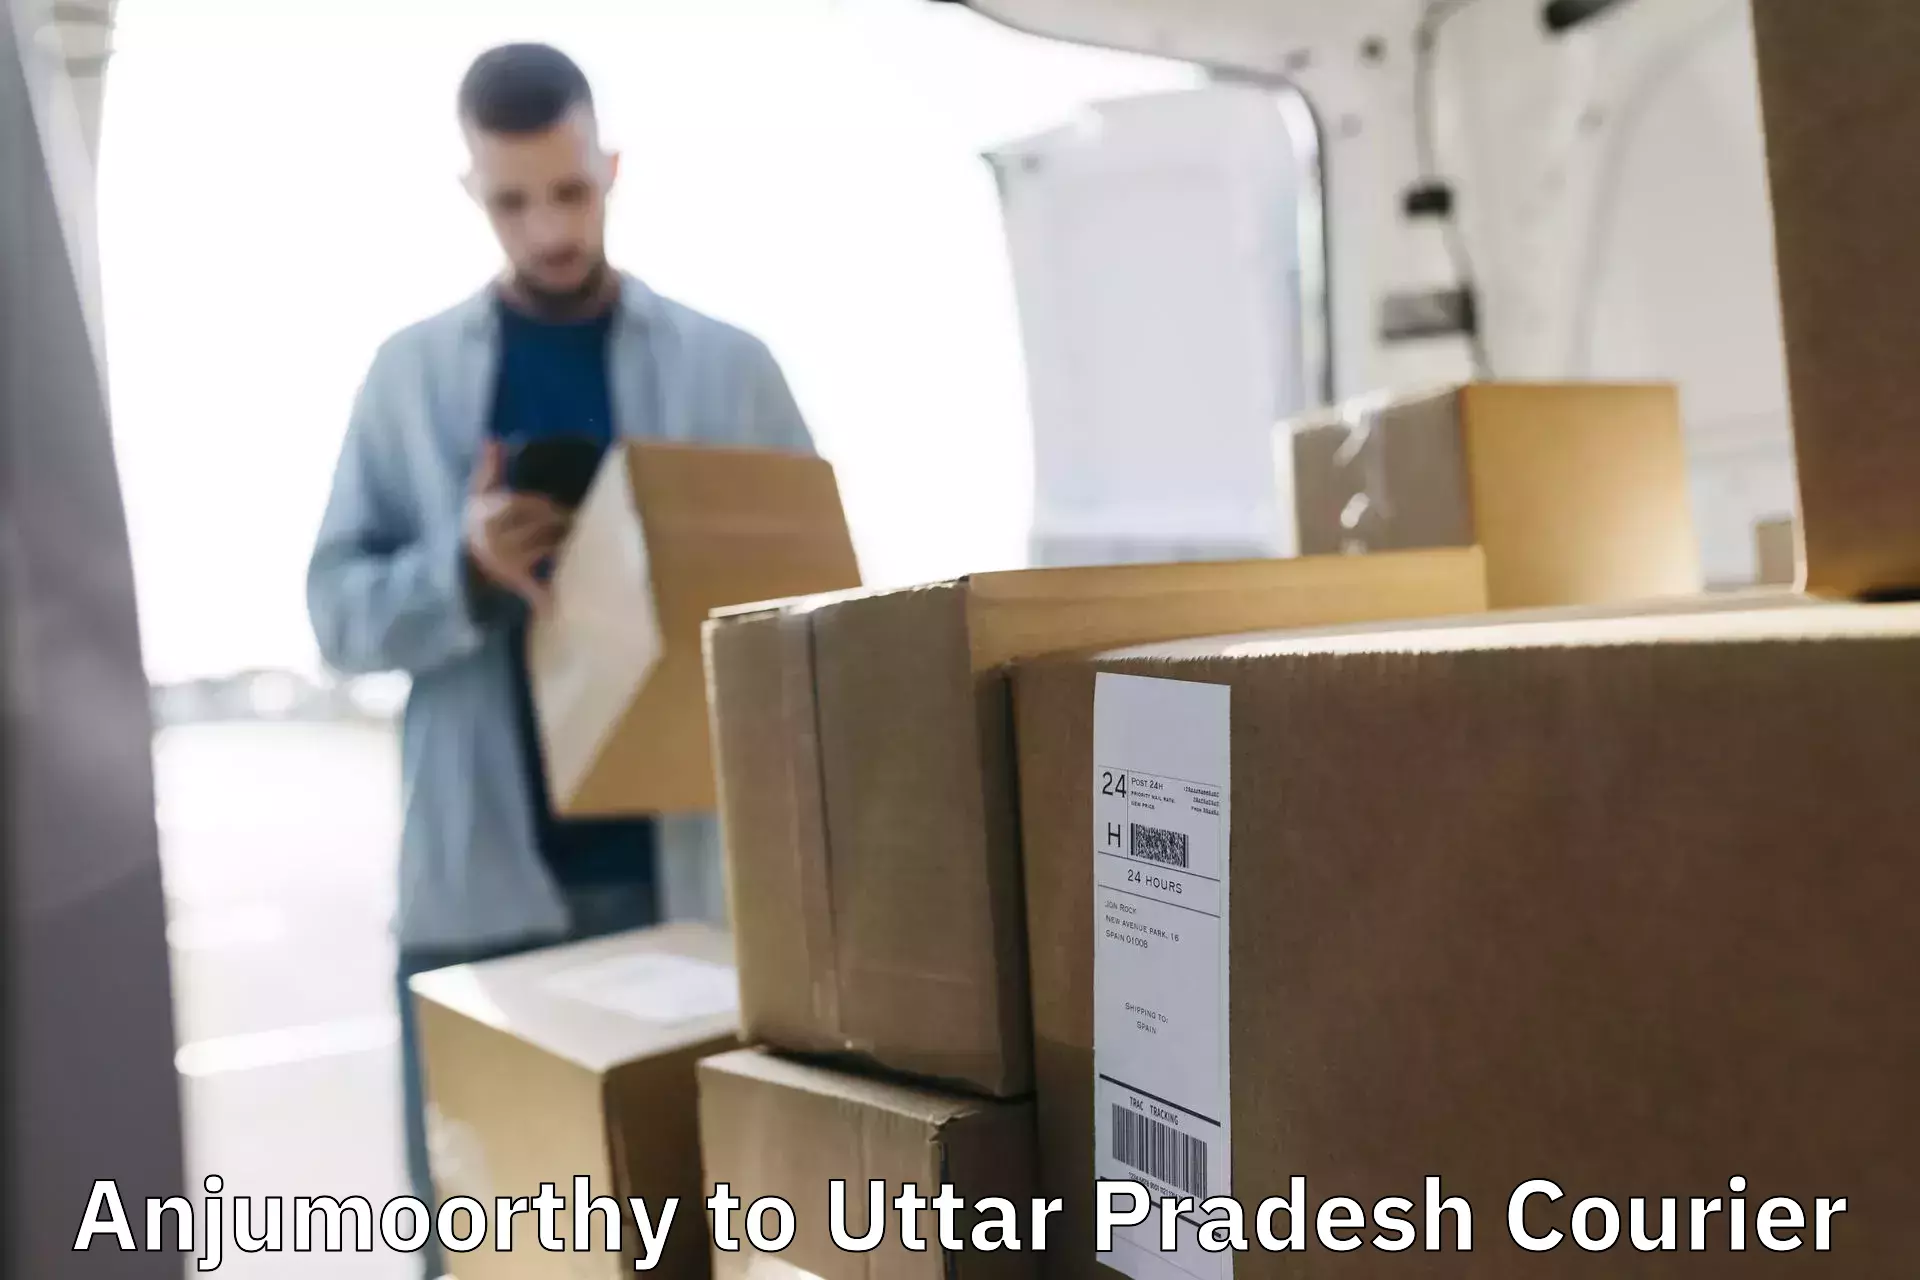 International courier networks Anjumoorthy to Fatehabad Agra